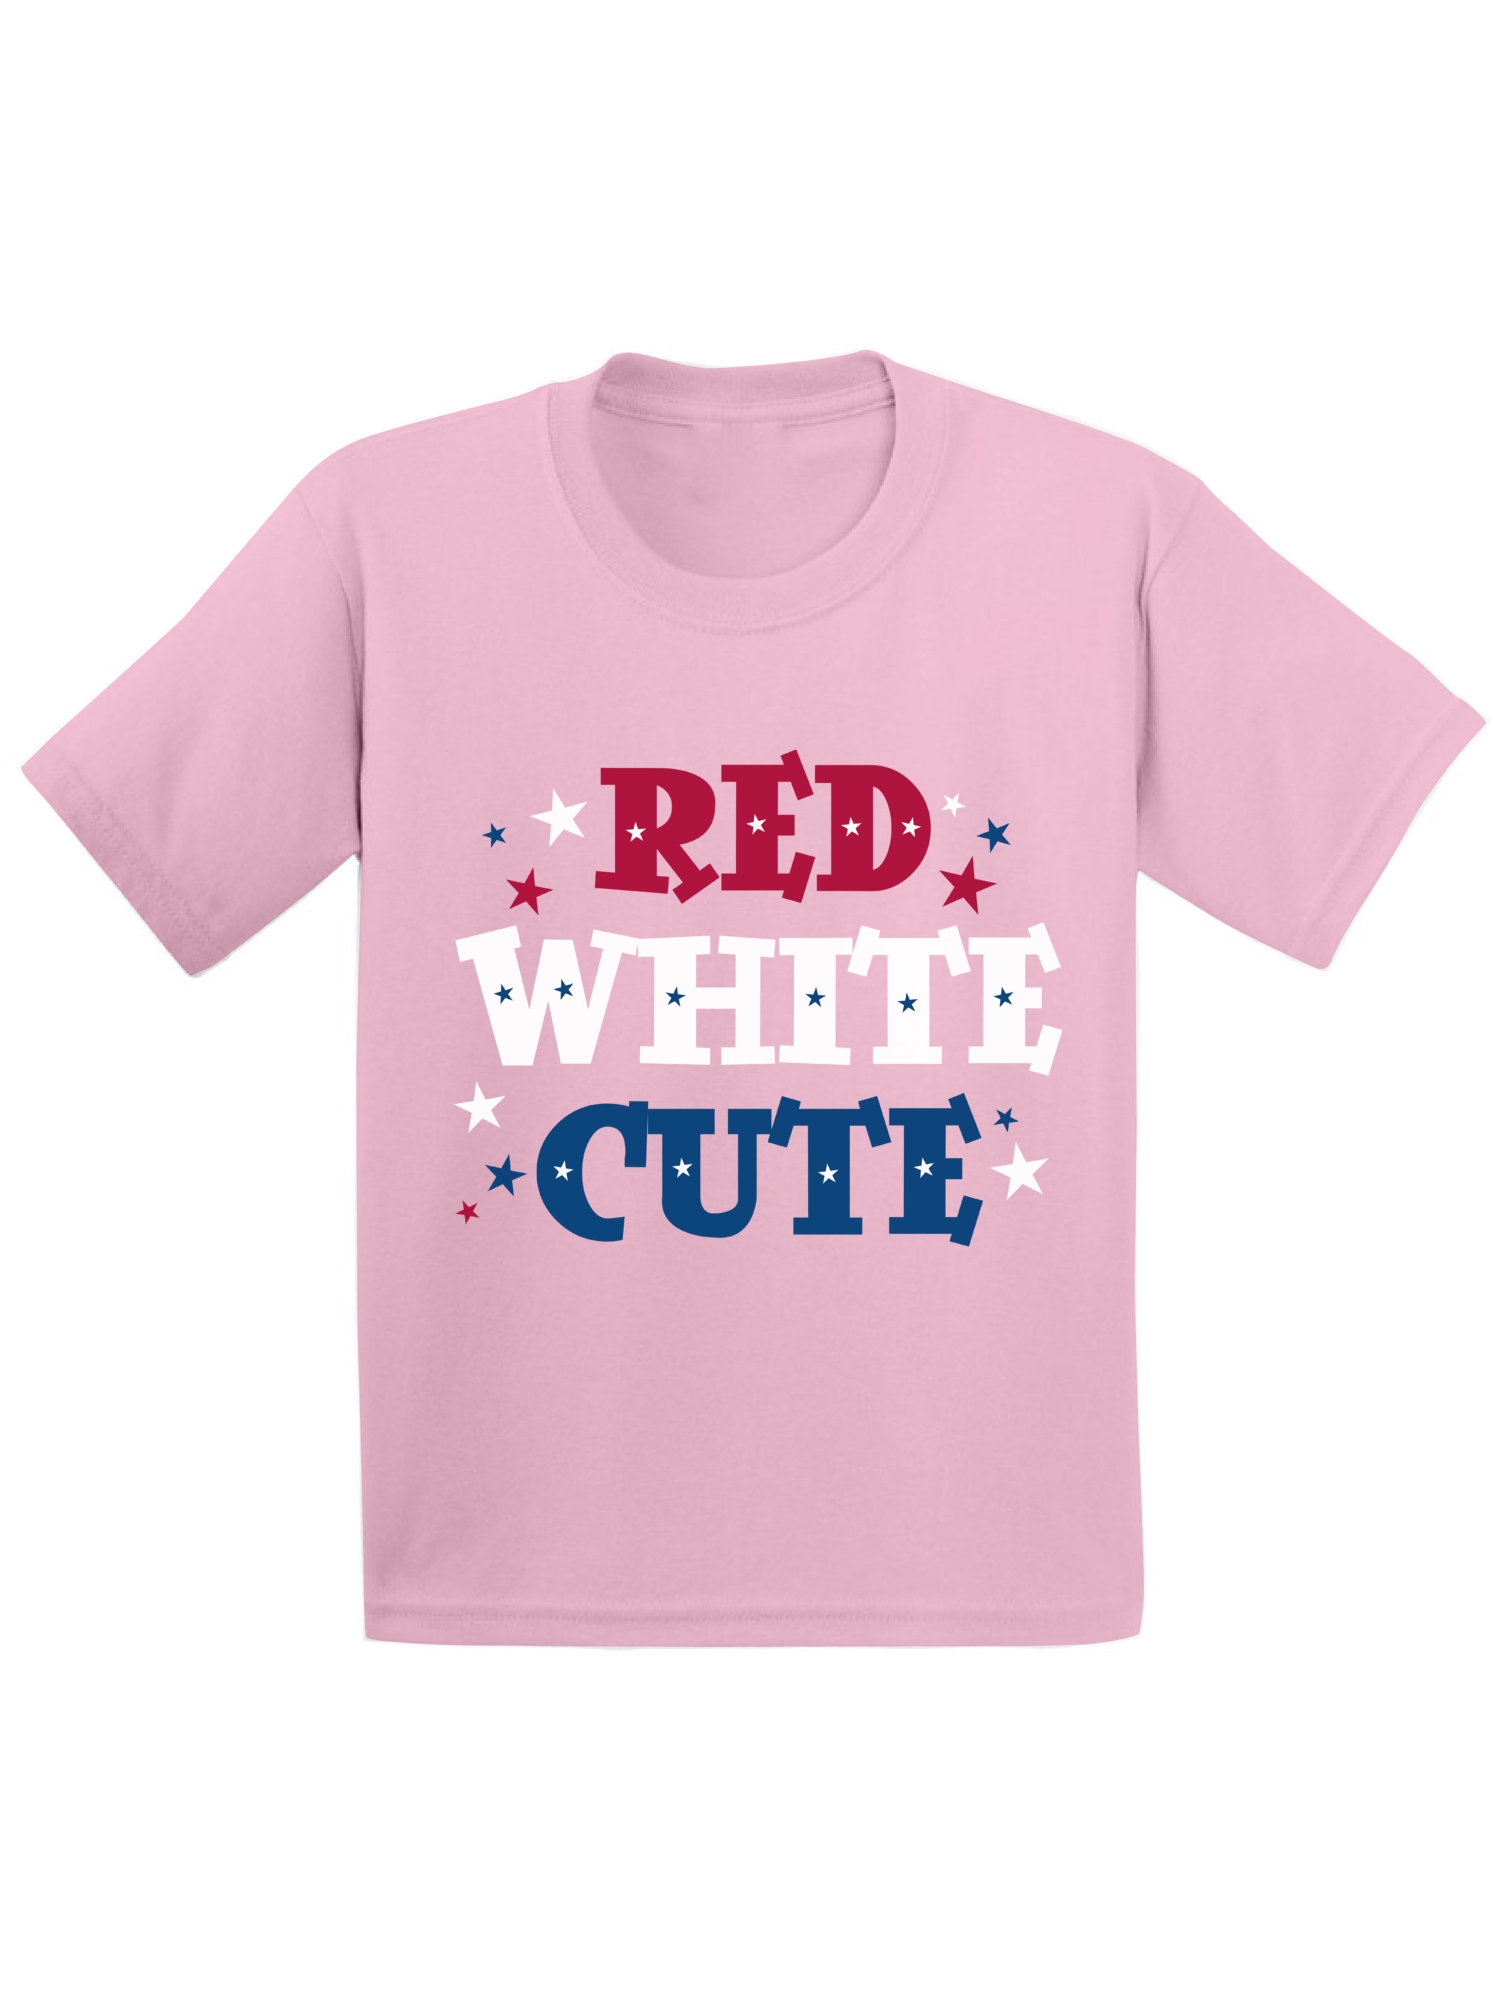 Awkward Styles Red White & Cute Toddler Shirt Cute 4th of July Shirts for Kids American Girl American Boy Red White & Blue Tshirt USA Star Kids Tshirt USA Gifts for Toddler Indenpendence Day Gifts - image 1 of 4